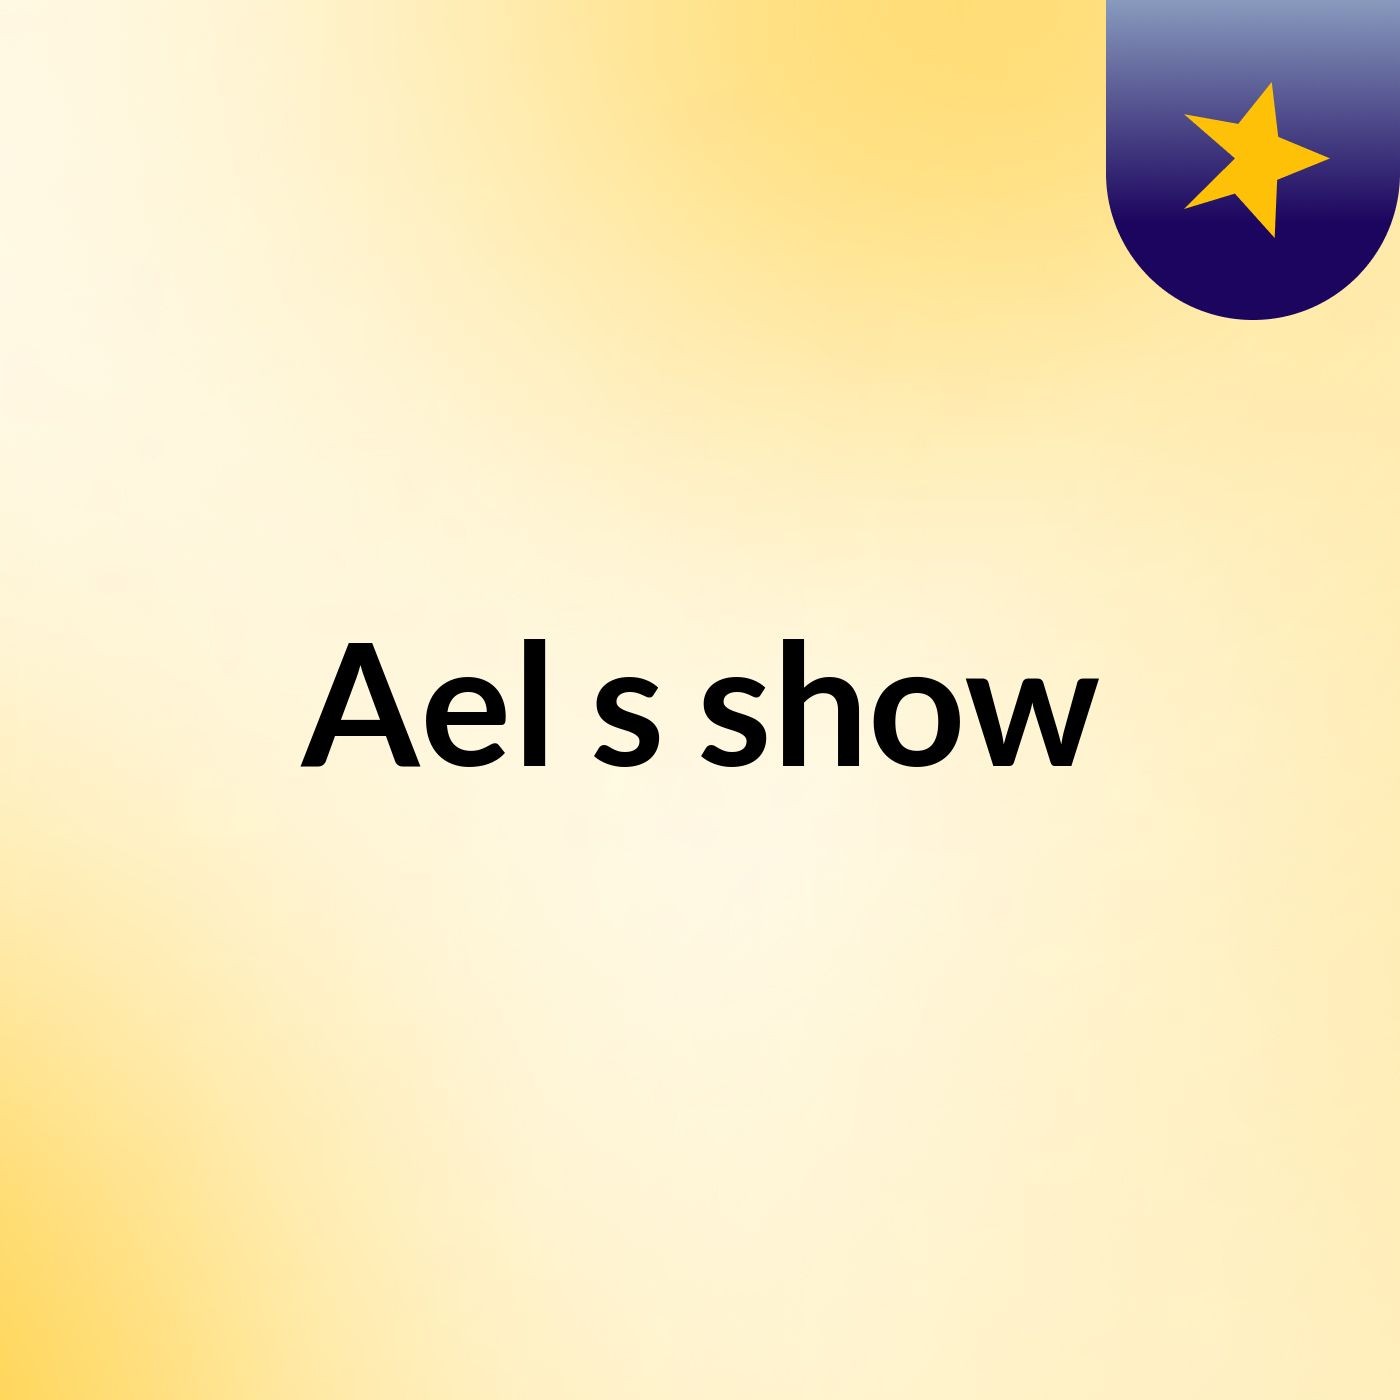 Ael's show